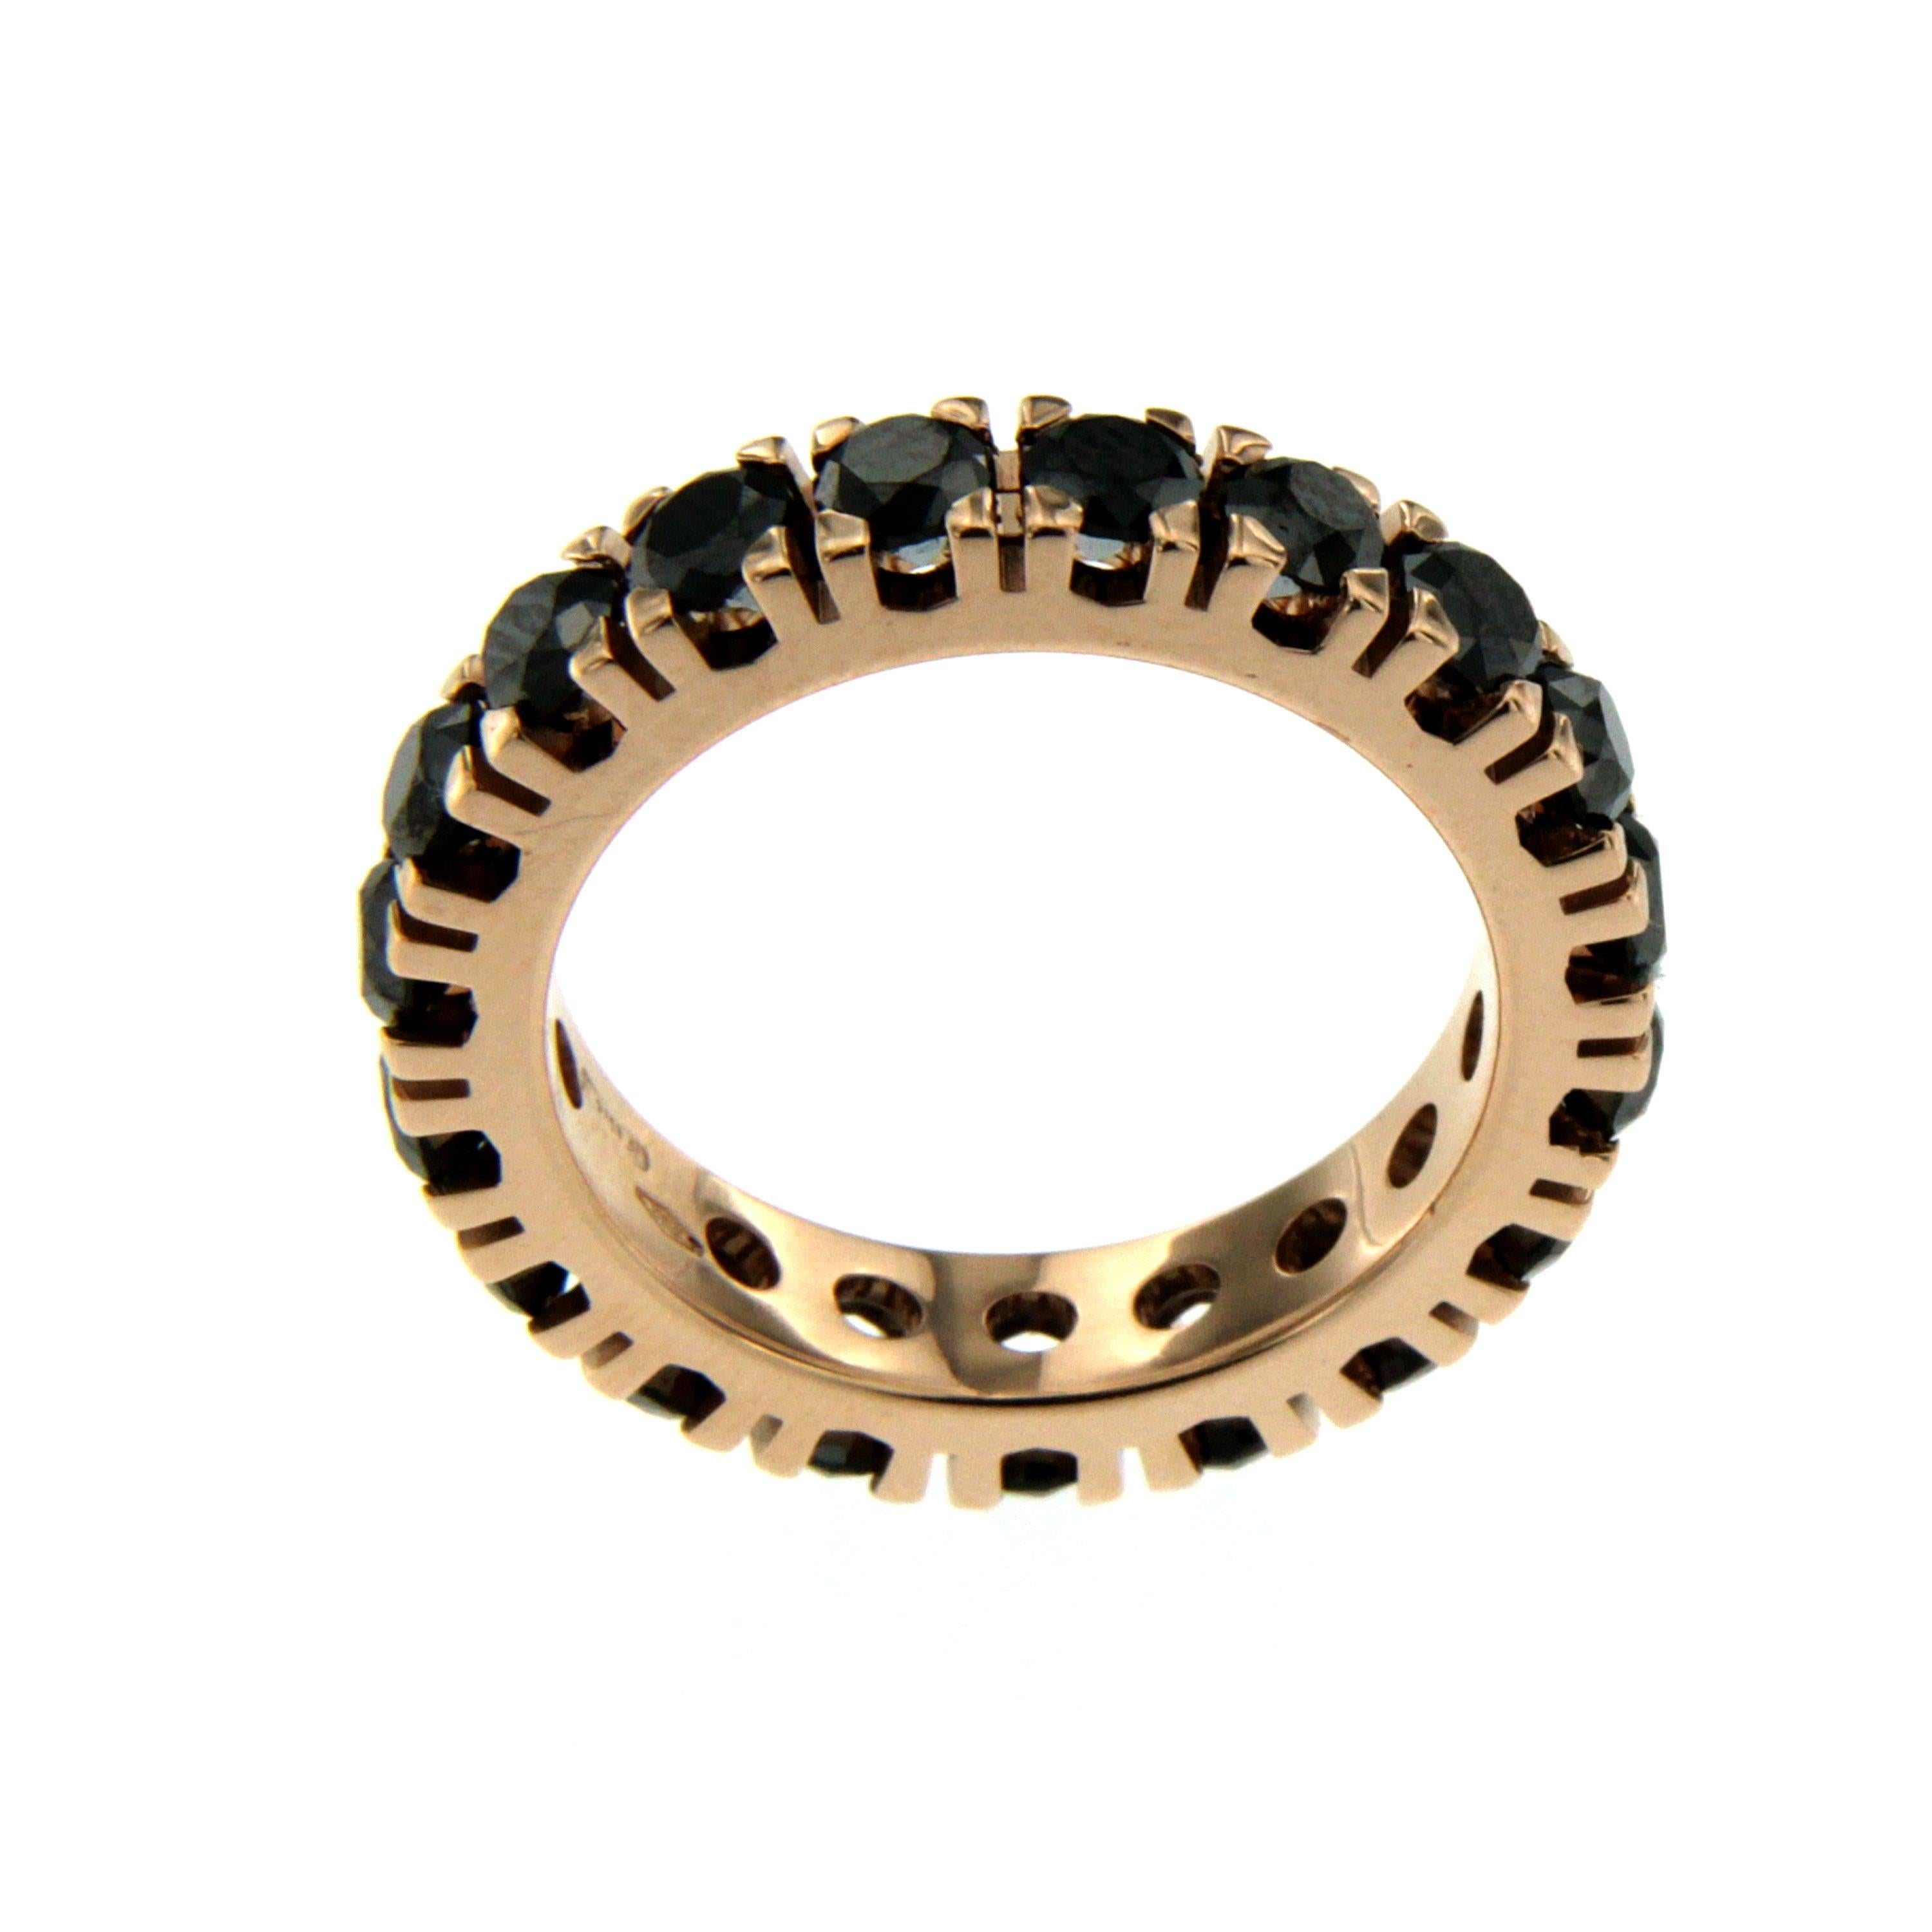 This timeless elegant black diamond eternity ring is set with black diamonds weighing approx. 2.60 carats, made in 18k rose gold. Its simple designs makes it the perfect everyday ring for any jewellery lover. 

CONDITION: Brand New 
METAL: 18k rose